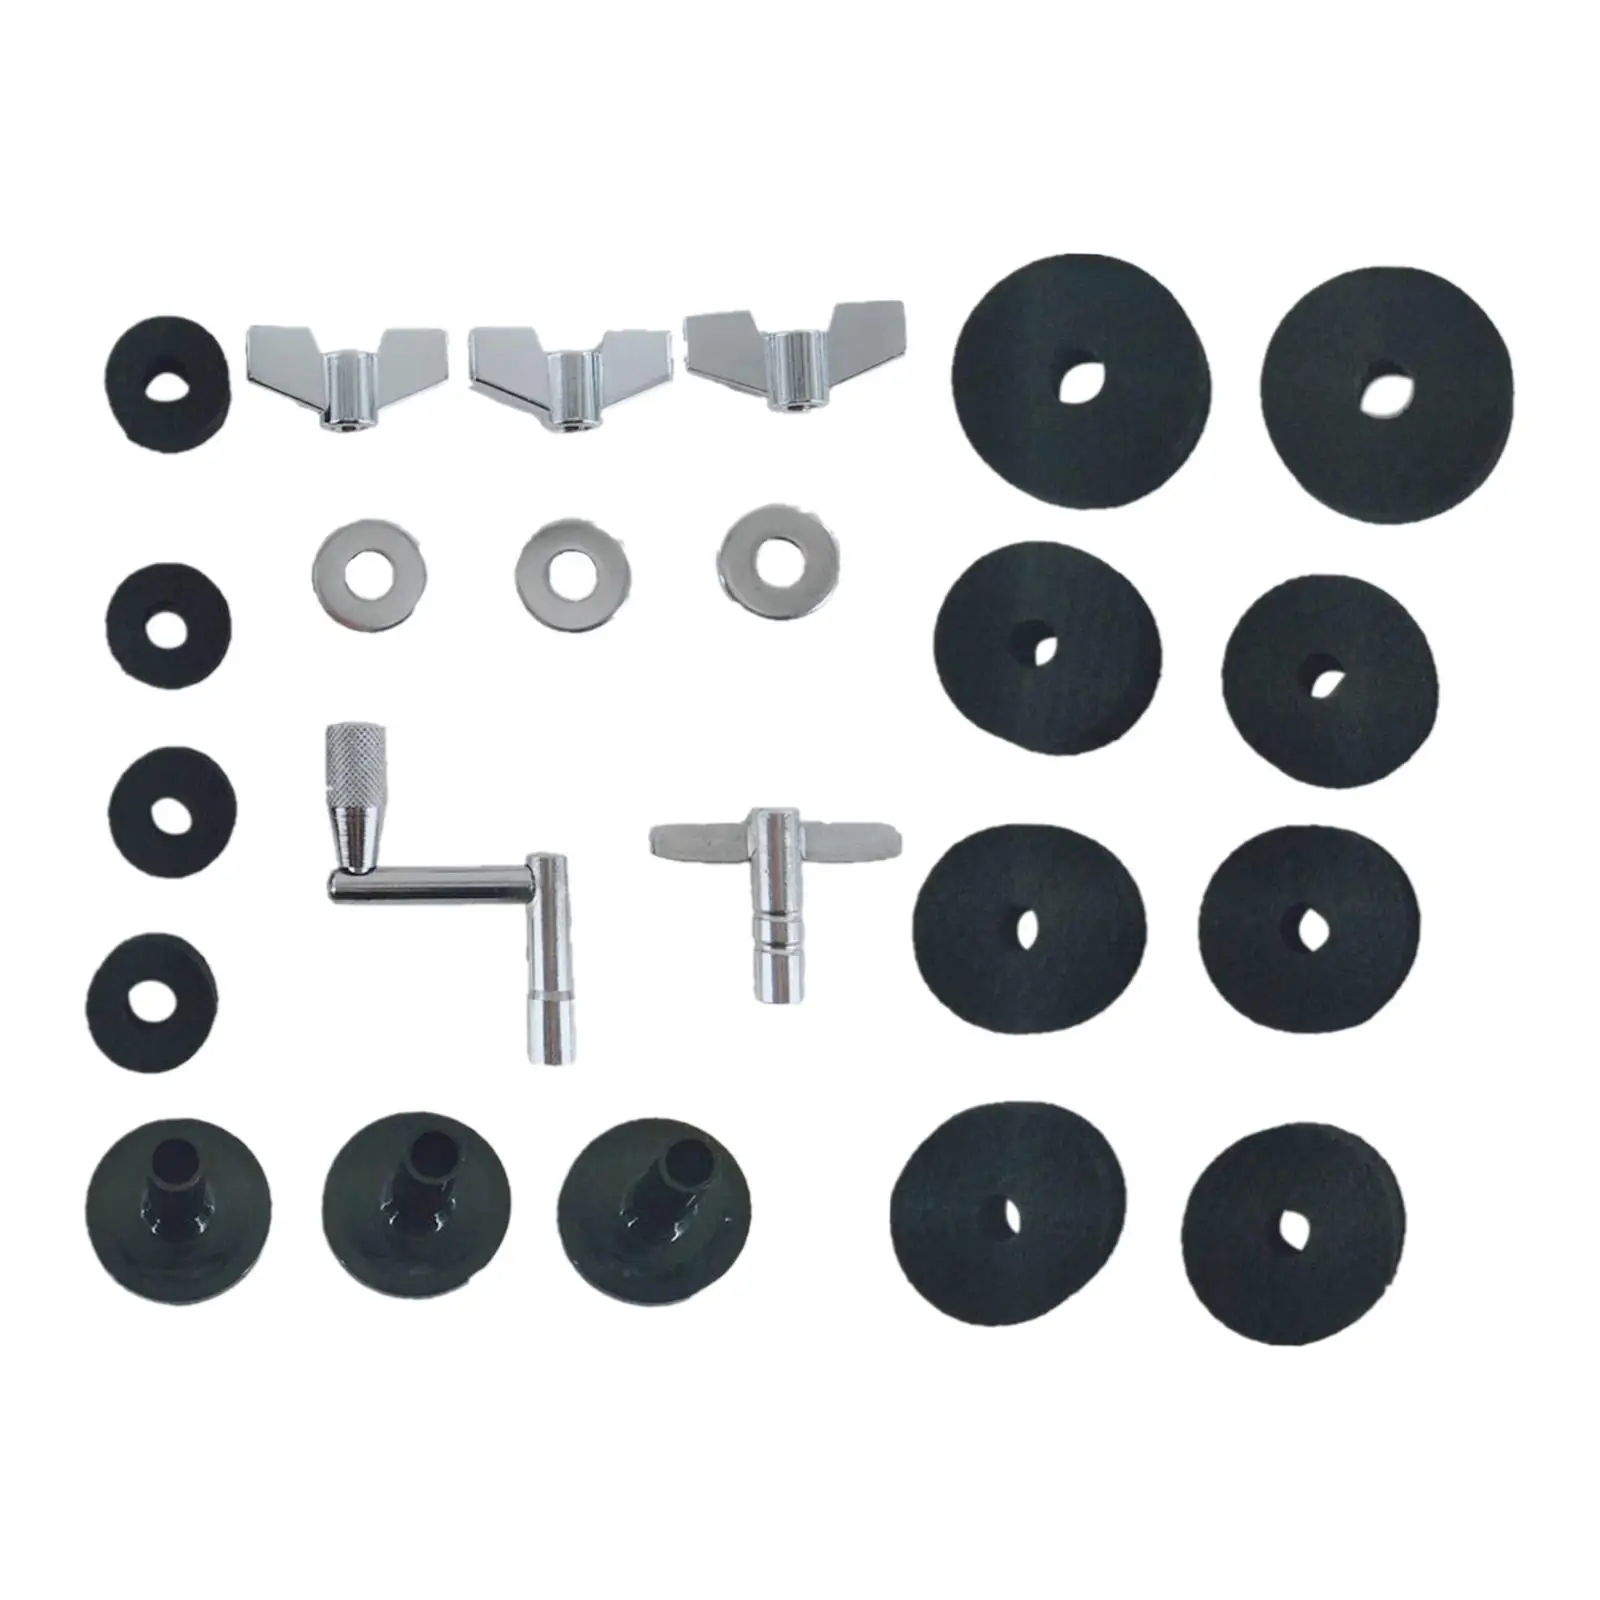 23x Replacement Parts Cymbal Felts Washers Replacement Accessories Replacement Kit Wing Nuts Musical Accessories Drum Felt